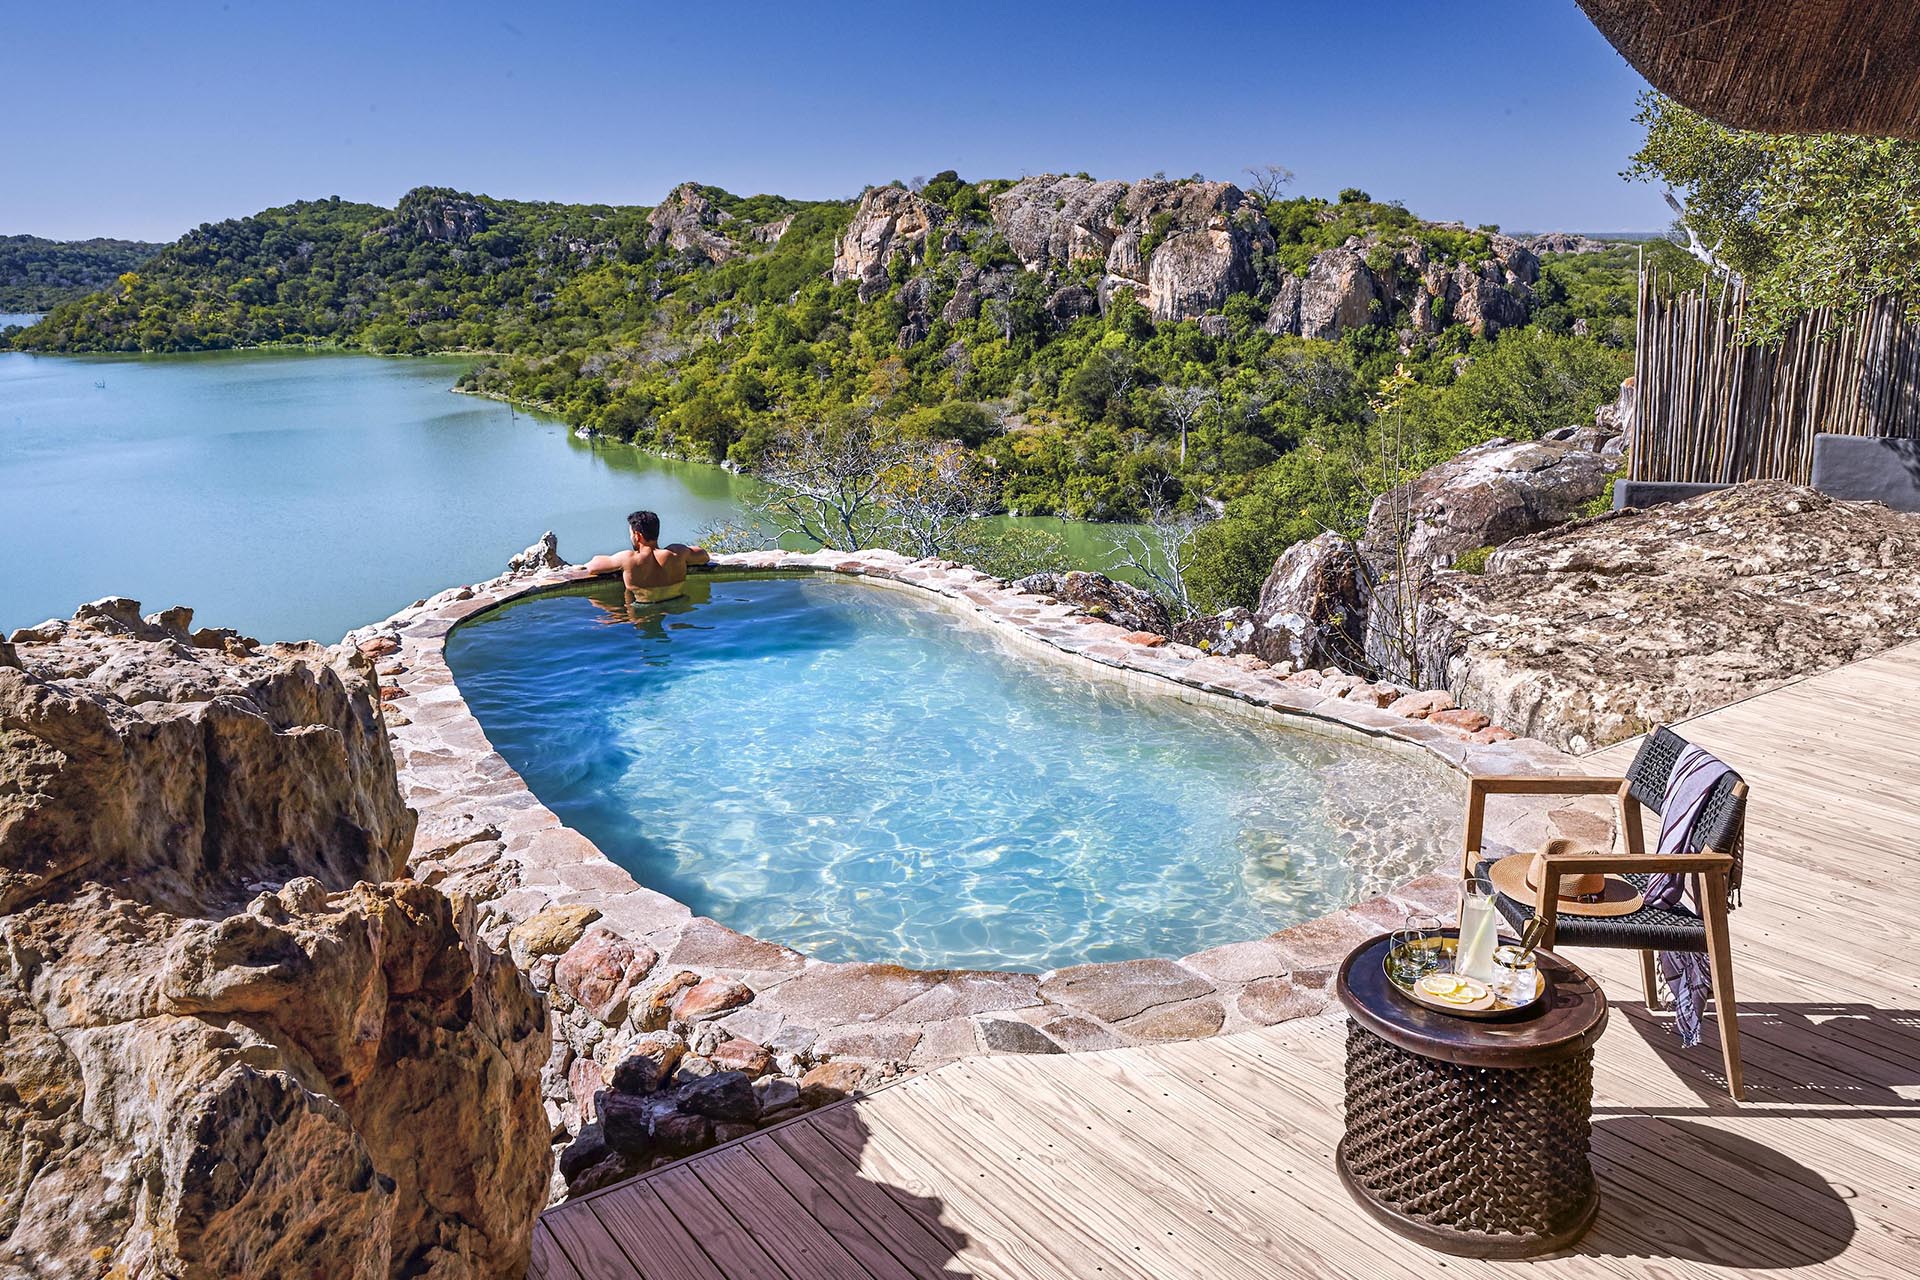 Lake views from a private pool at Singita Pamushana Lodge – one of the top Eco Lodges in Africa.